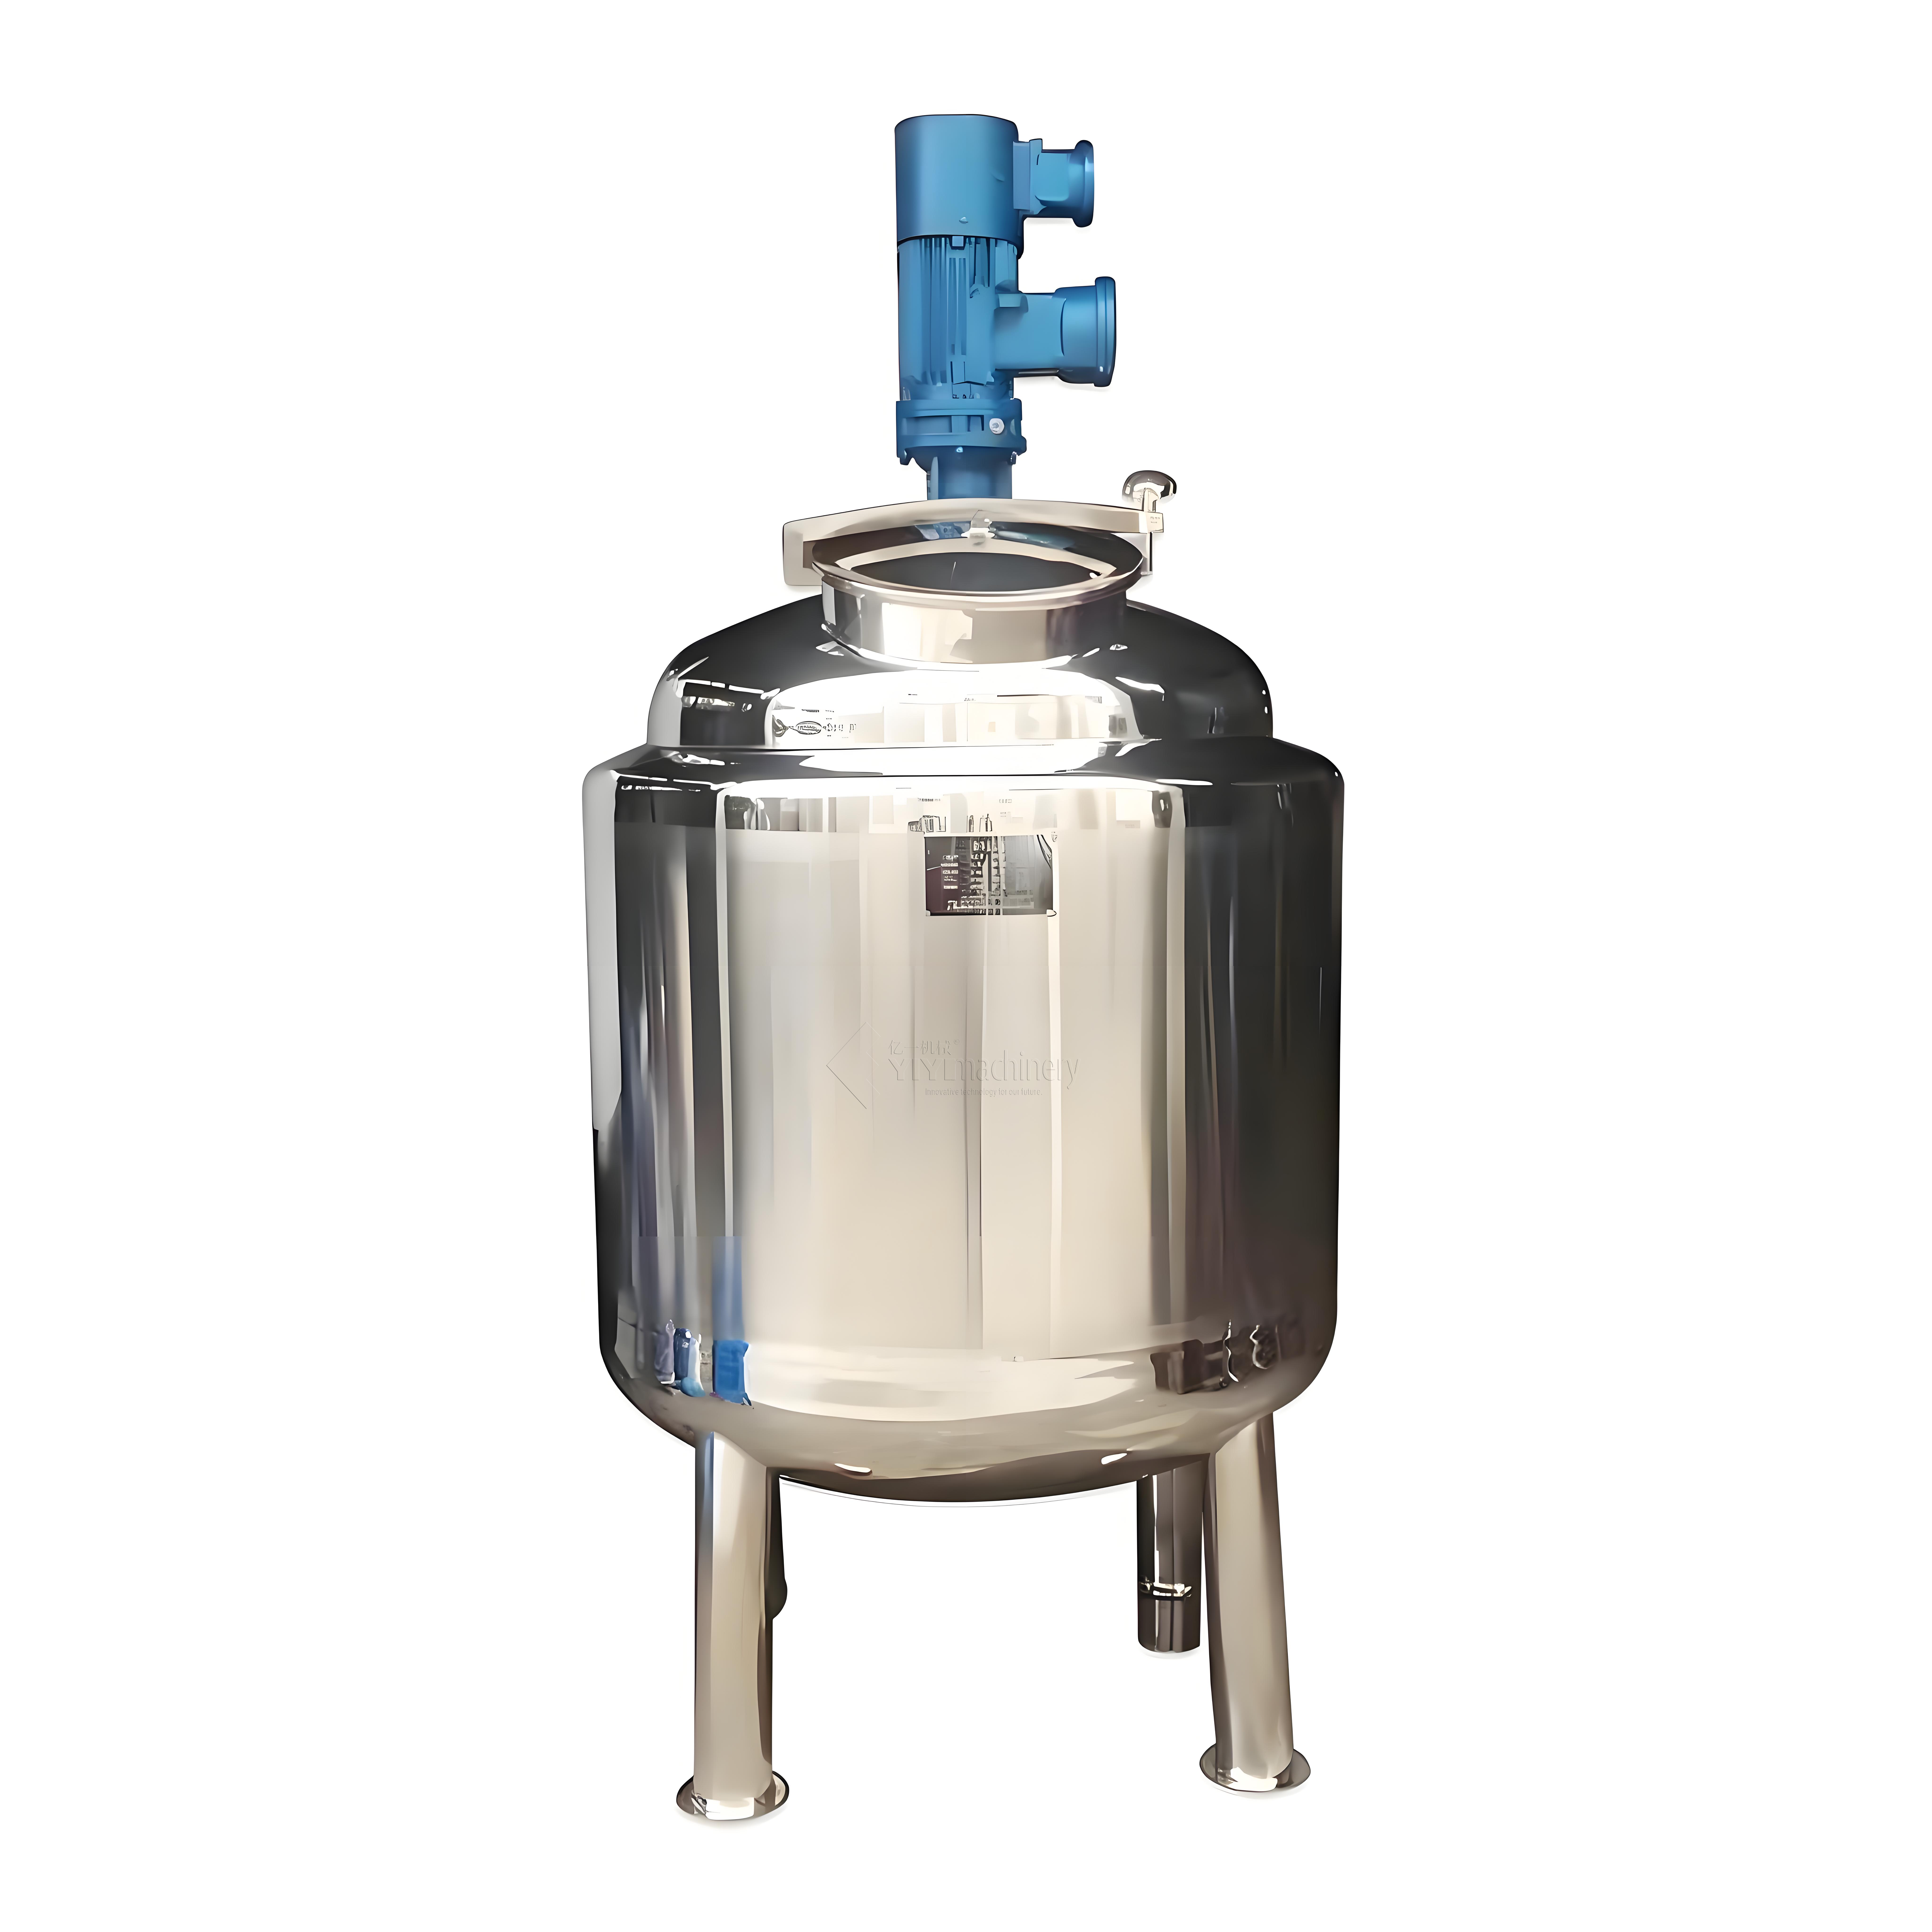 Beer Production Equipment Mixing Stainless Steel Tank Tanks Brewing